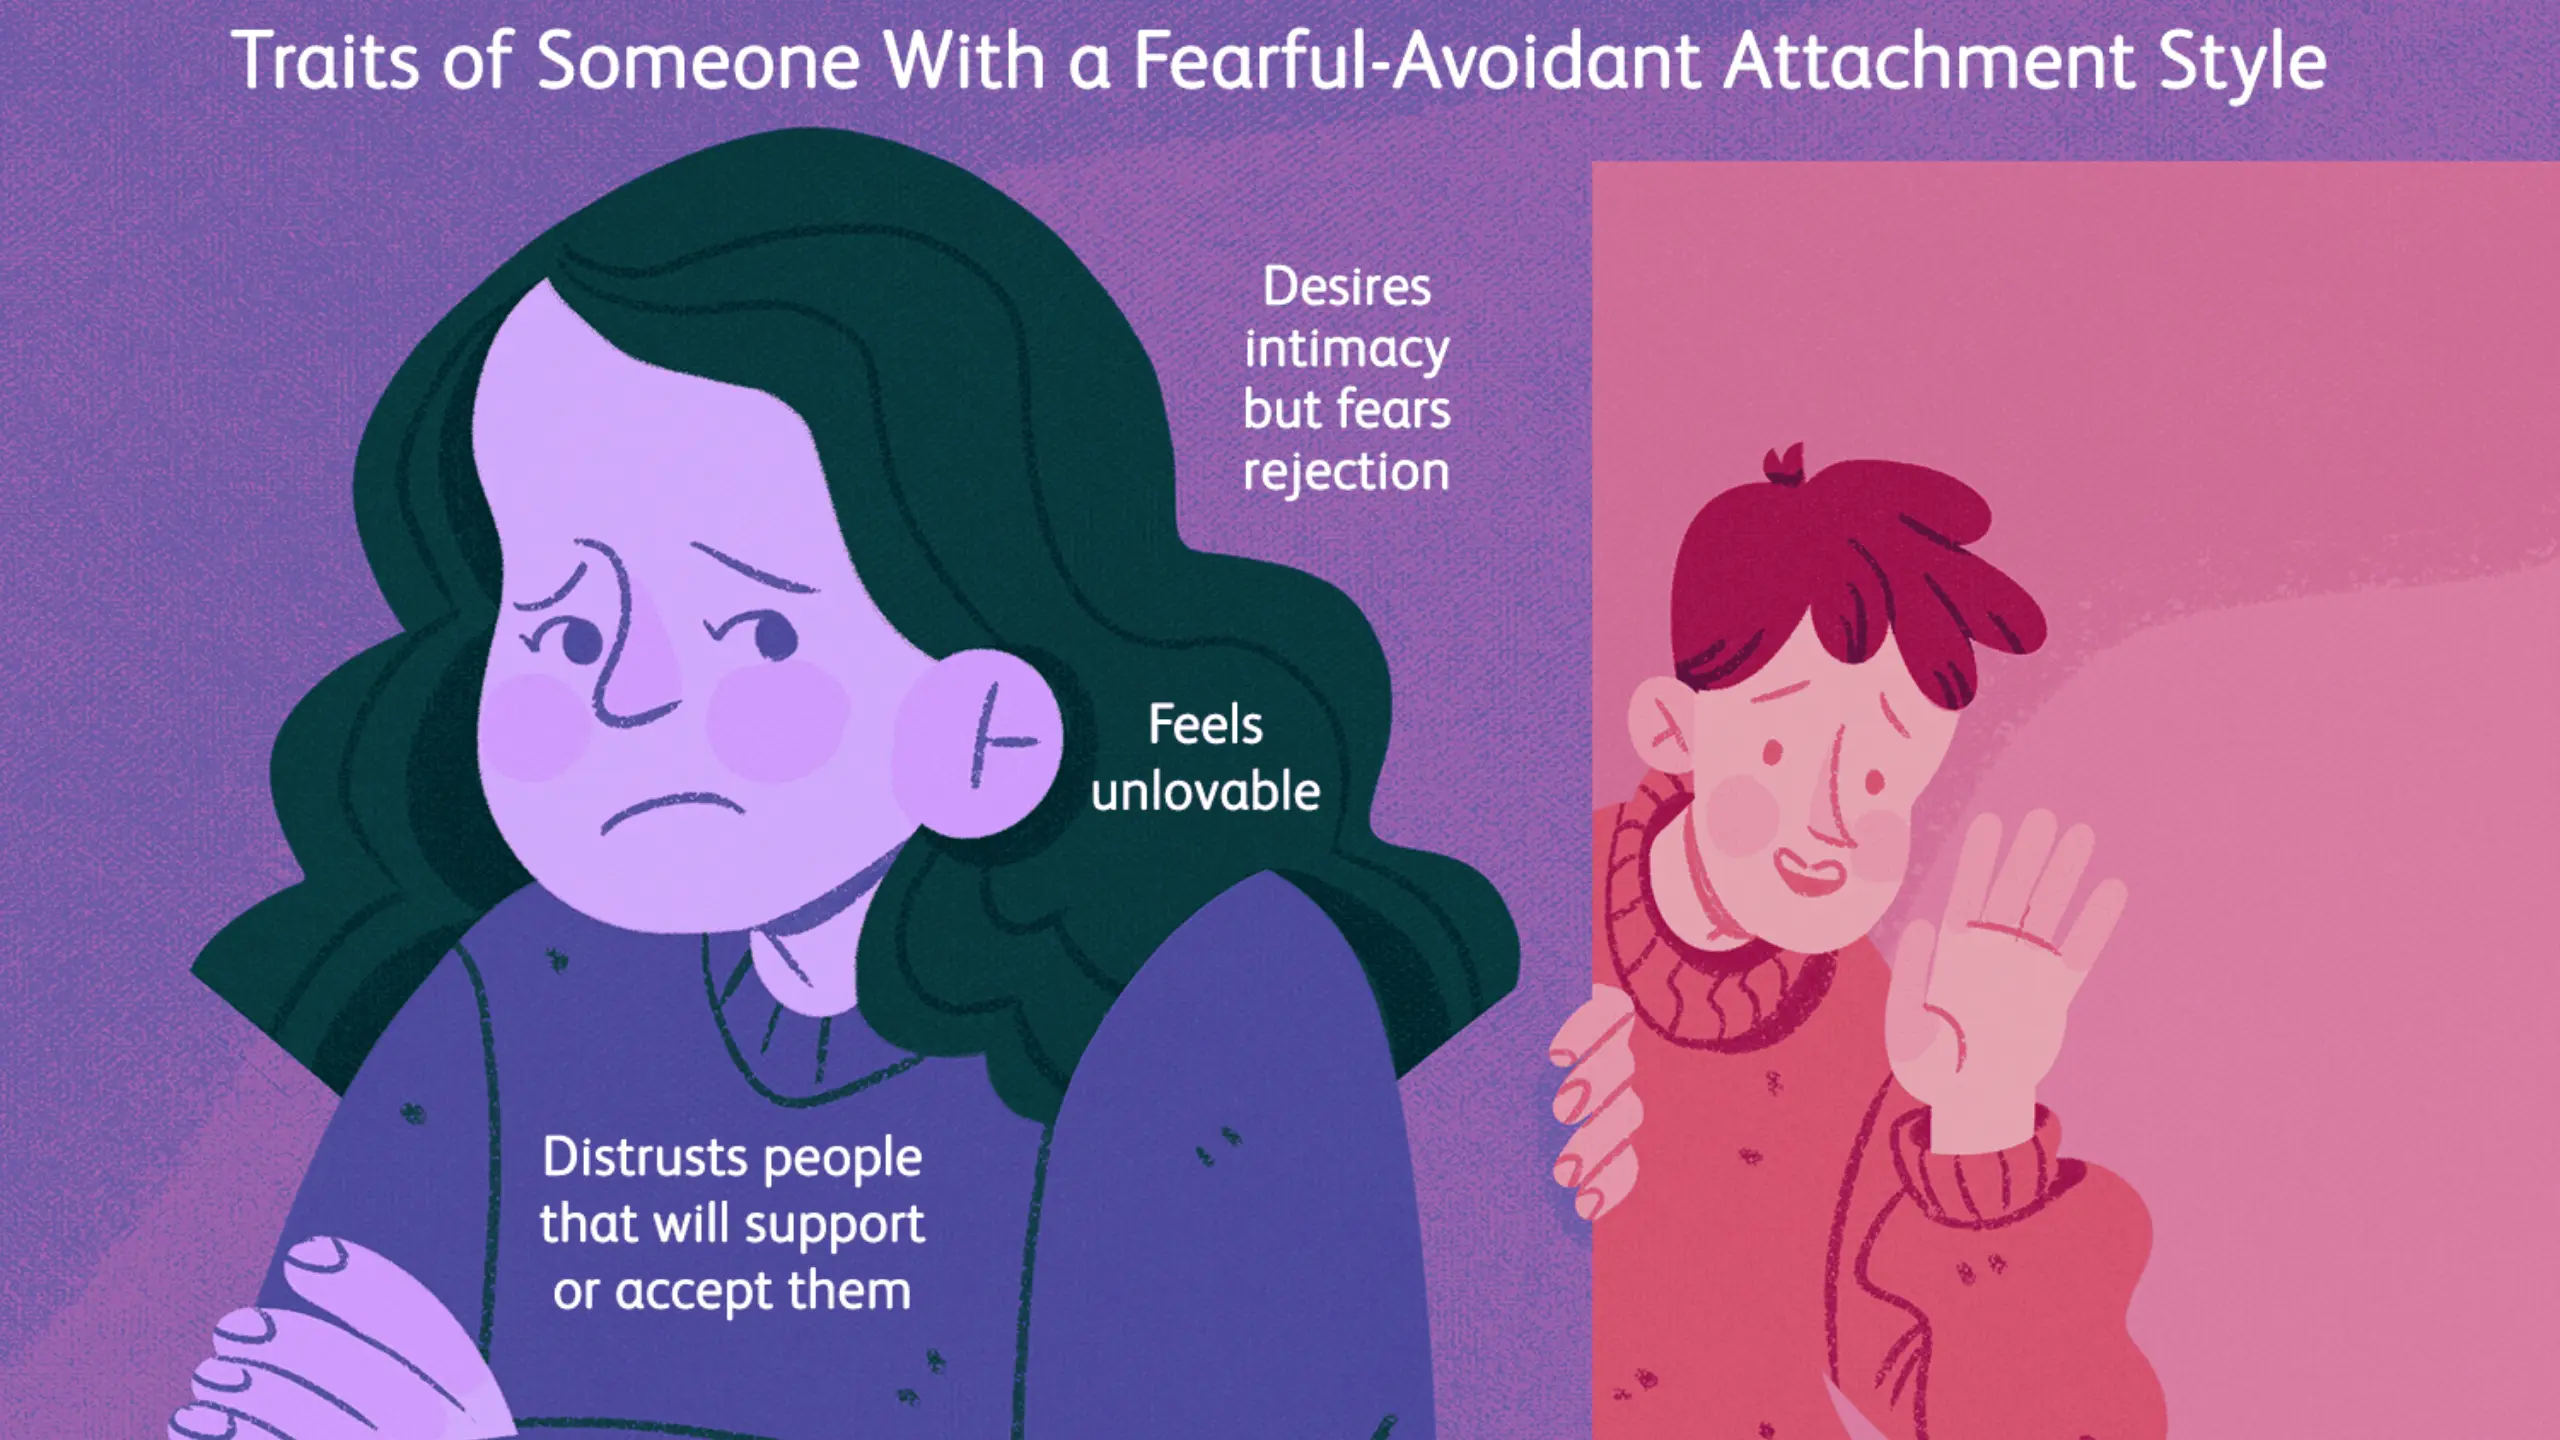 How a Fearful Avoidant Attachment Style Can Affect Your Life